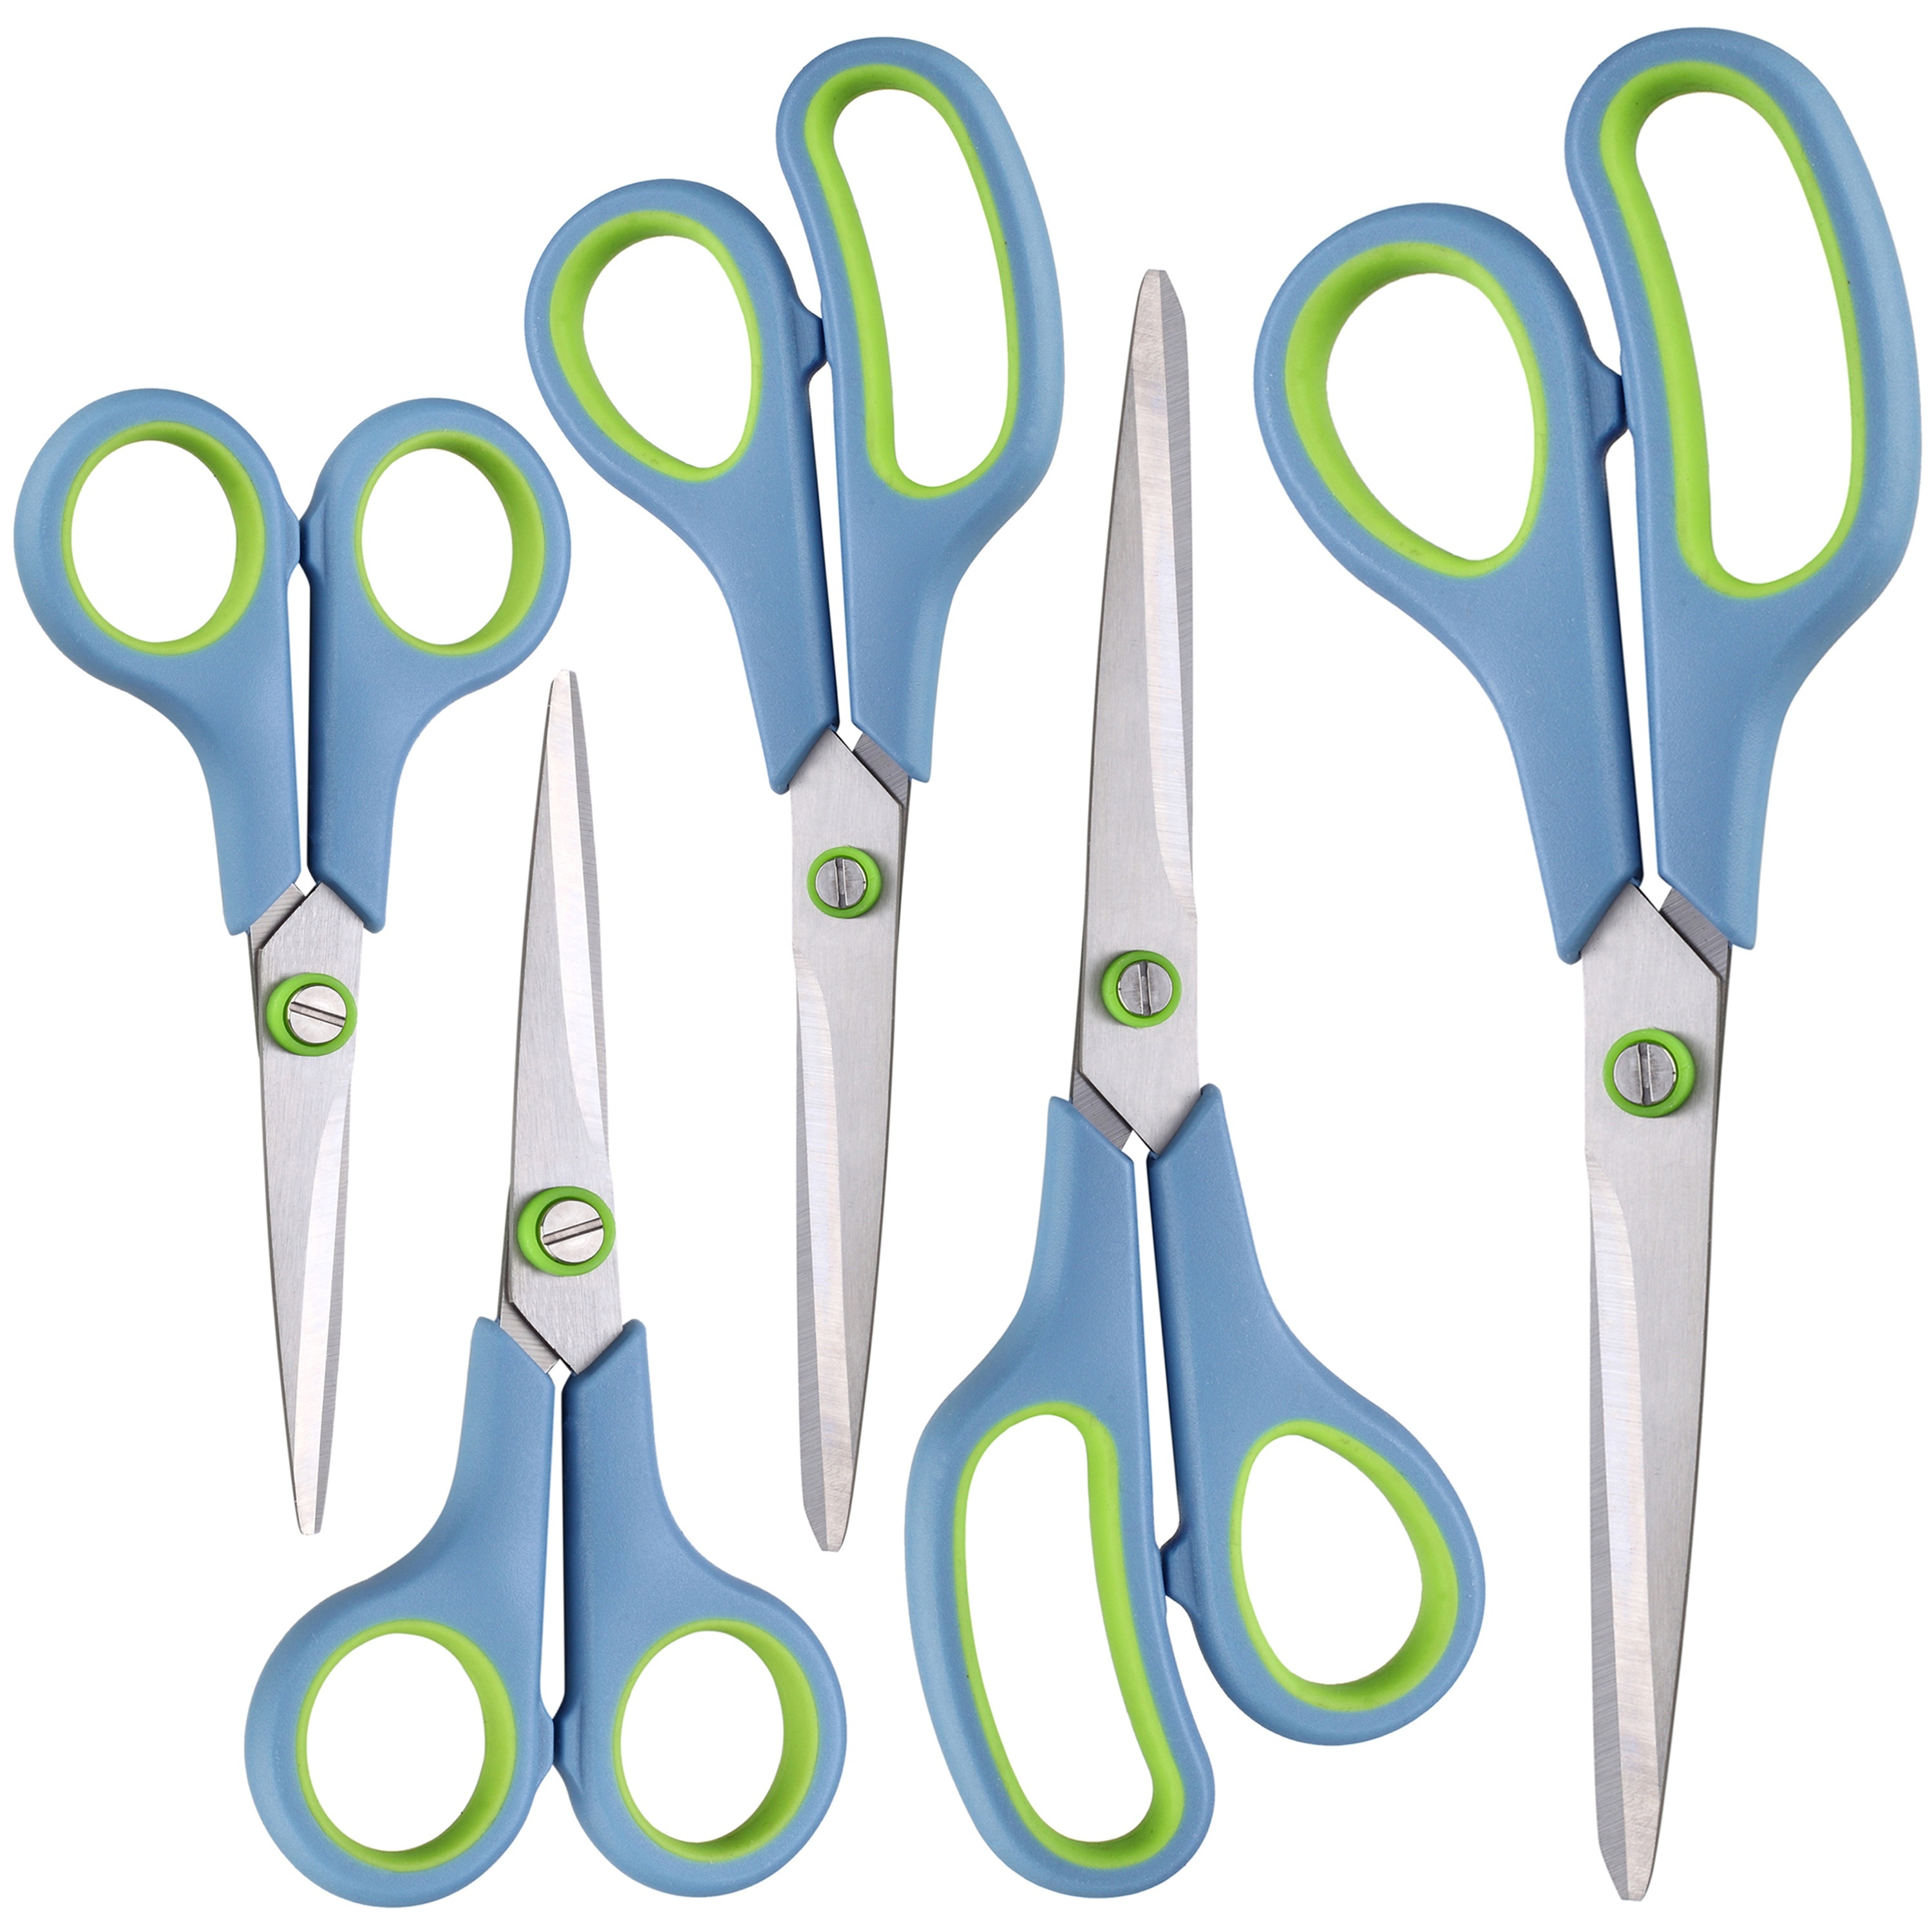 

5-piece Scissors Set, Ultra-sharp Stainless Steel Blades With Soft Comfort-grip Handles, Multipurpose Craft And Fabric Scissors For Office, Home, And School Use